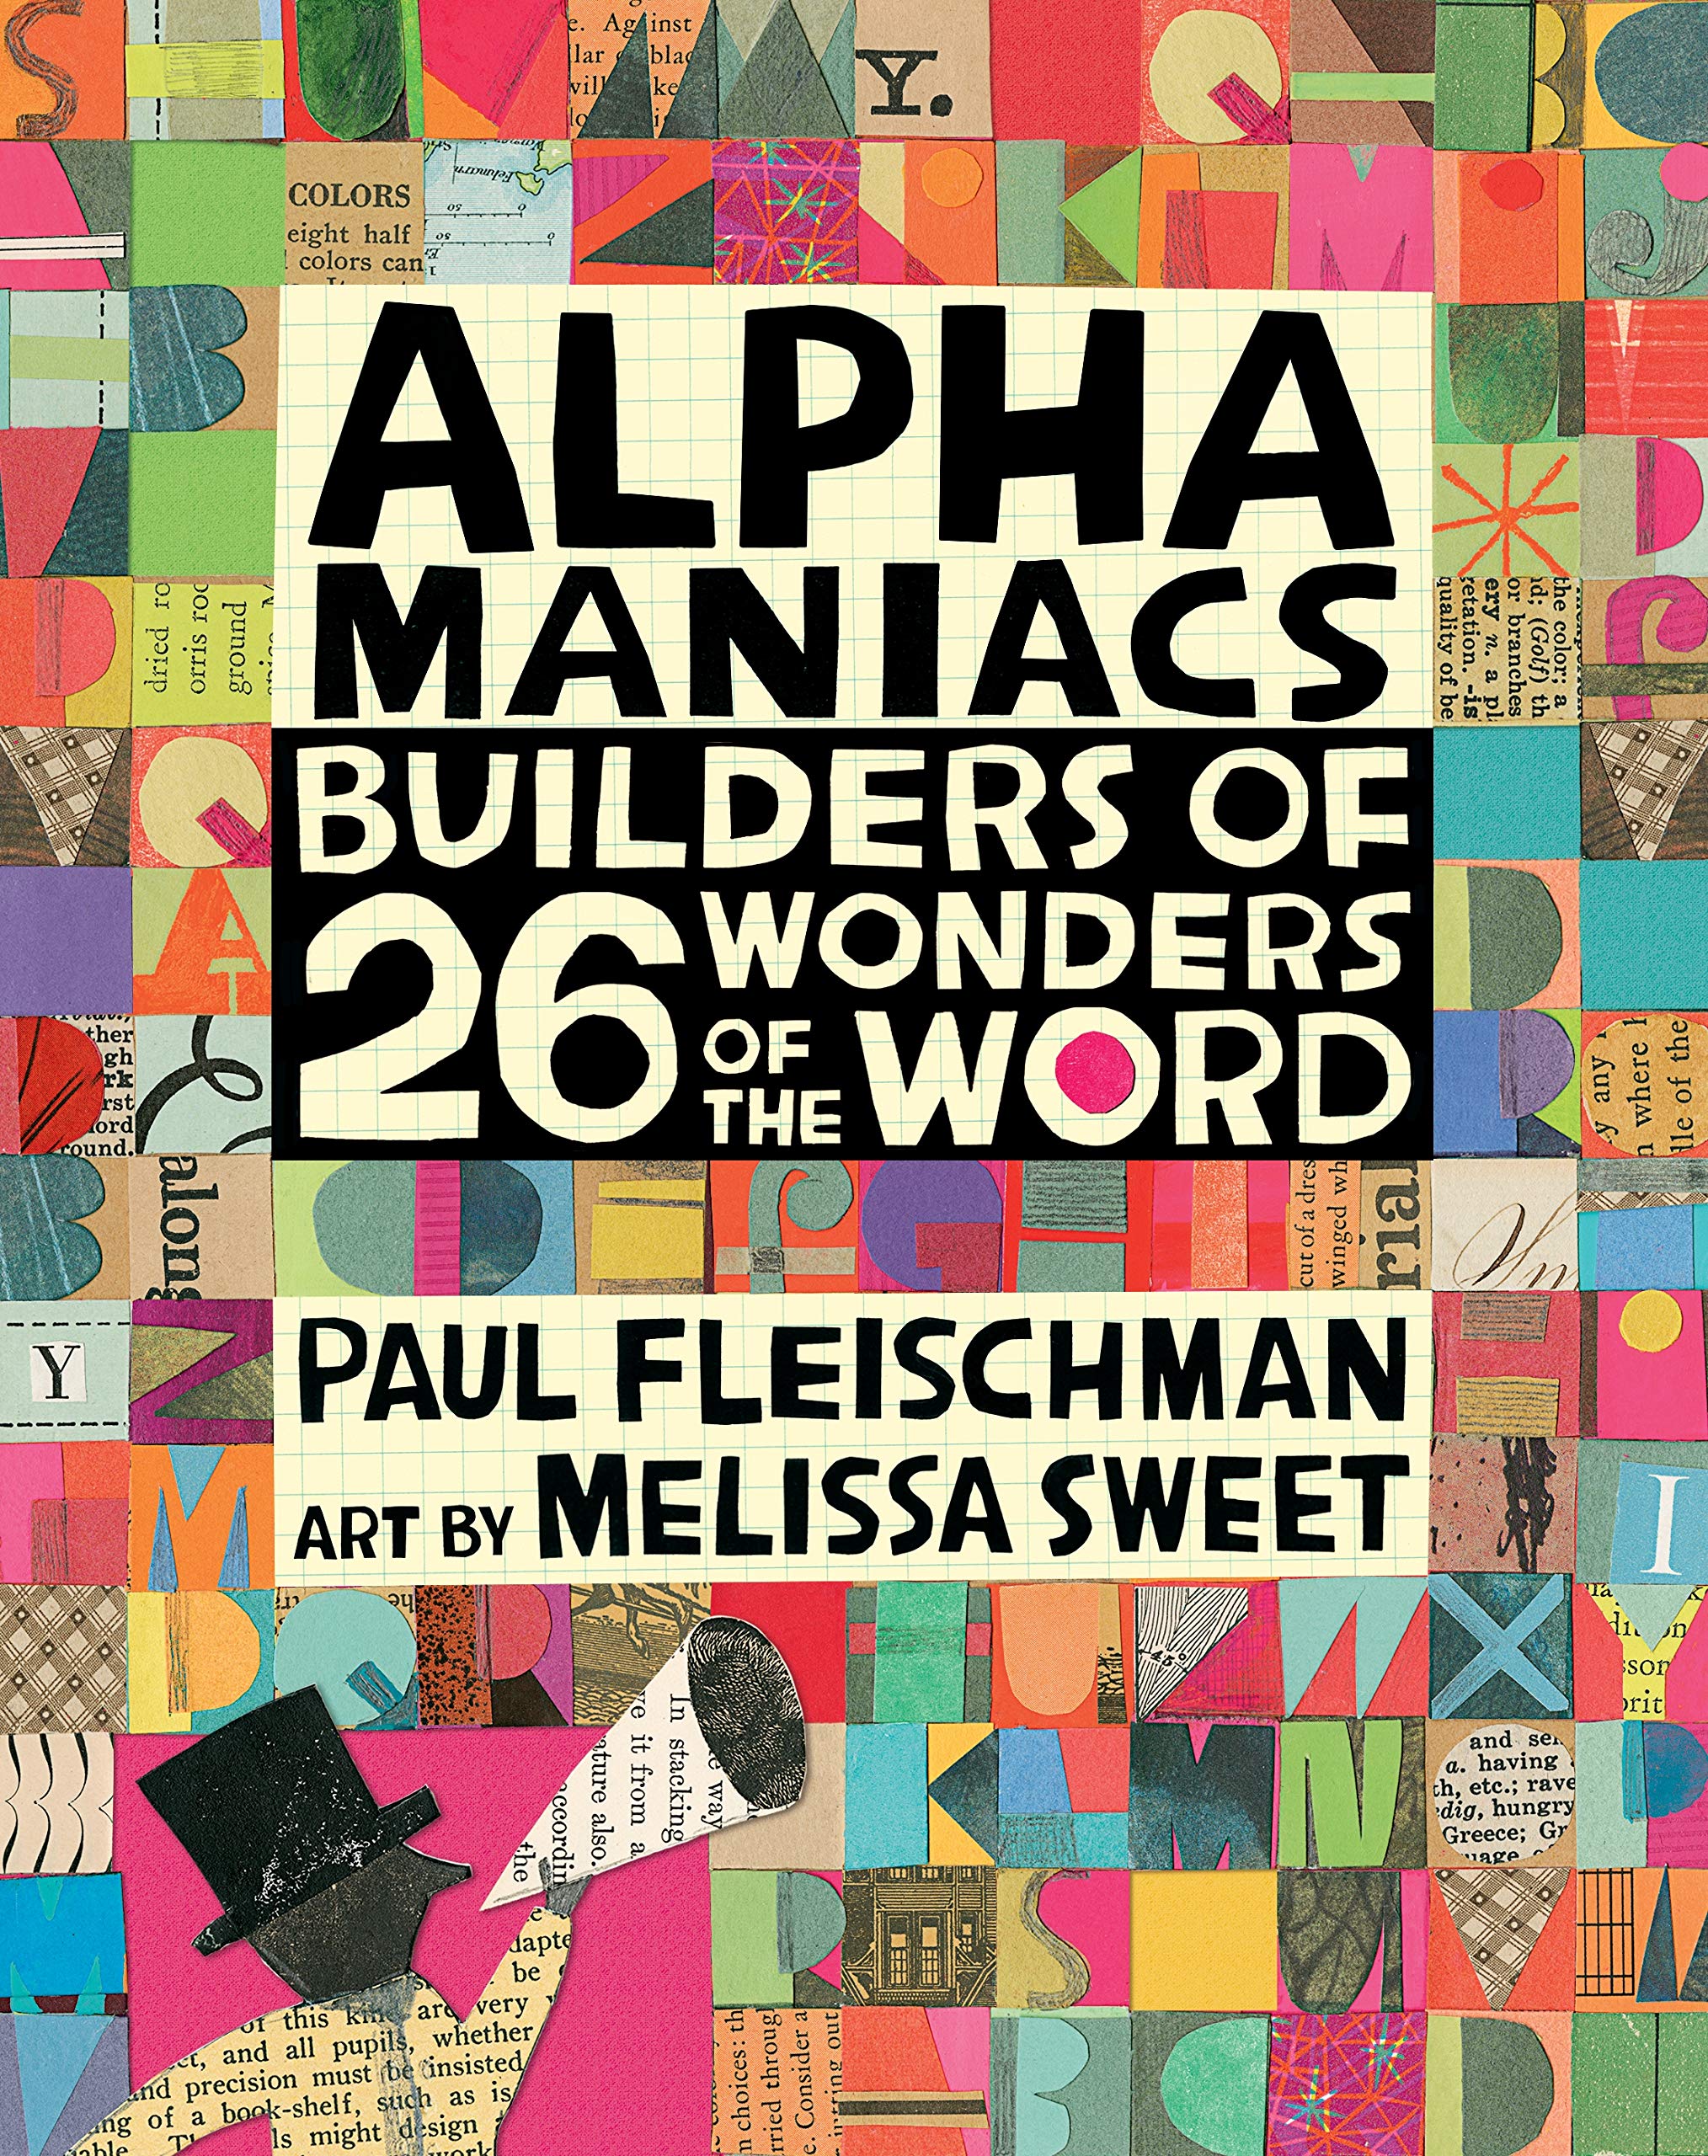 Alphamaniacs: Builders of 26 Wonders of the World